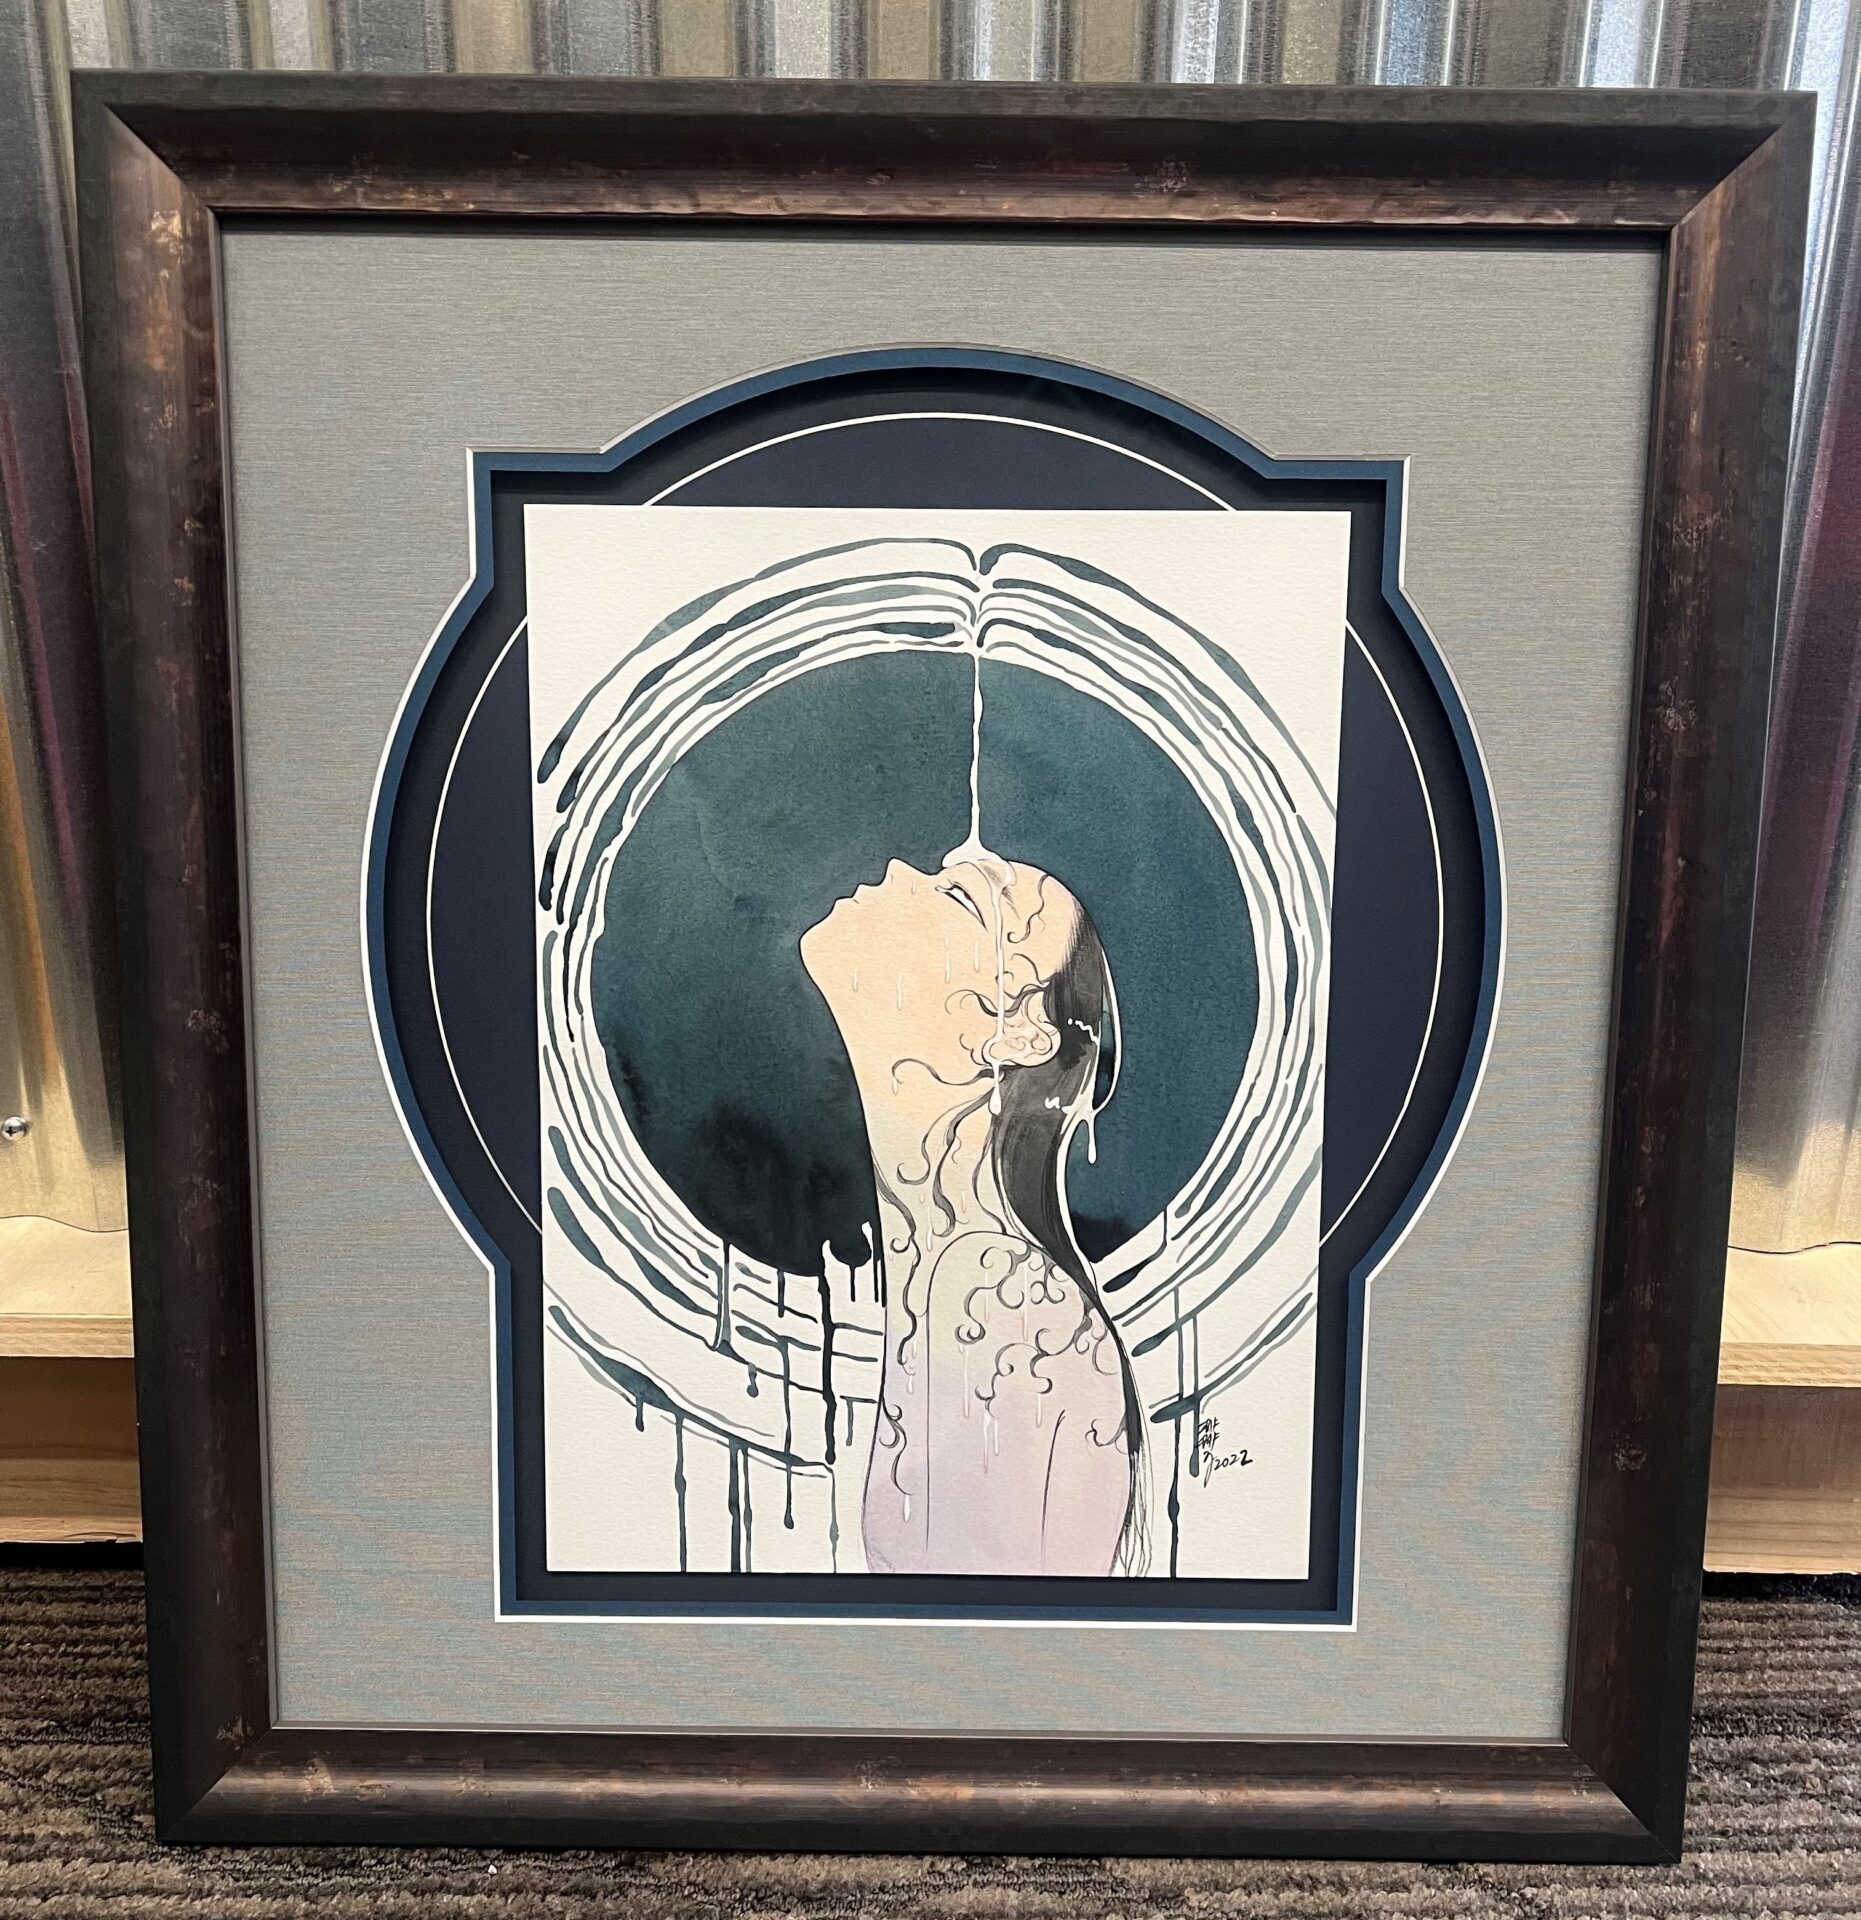 A framed painting of a hand with a circle around it.